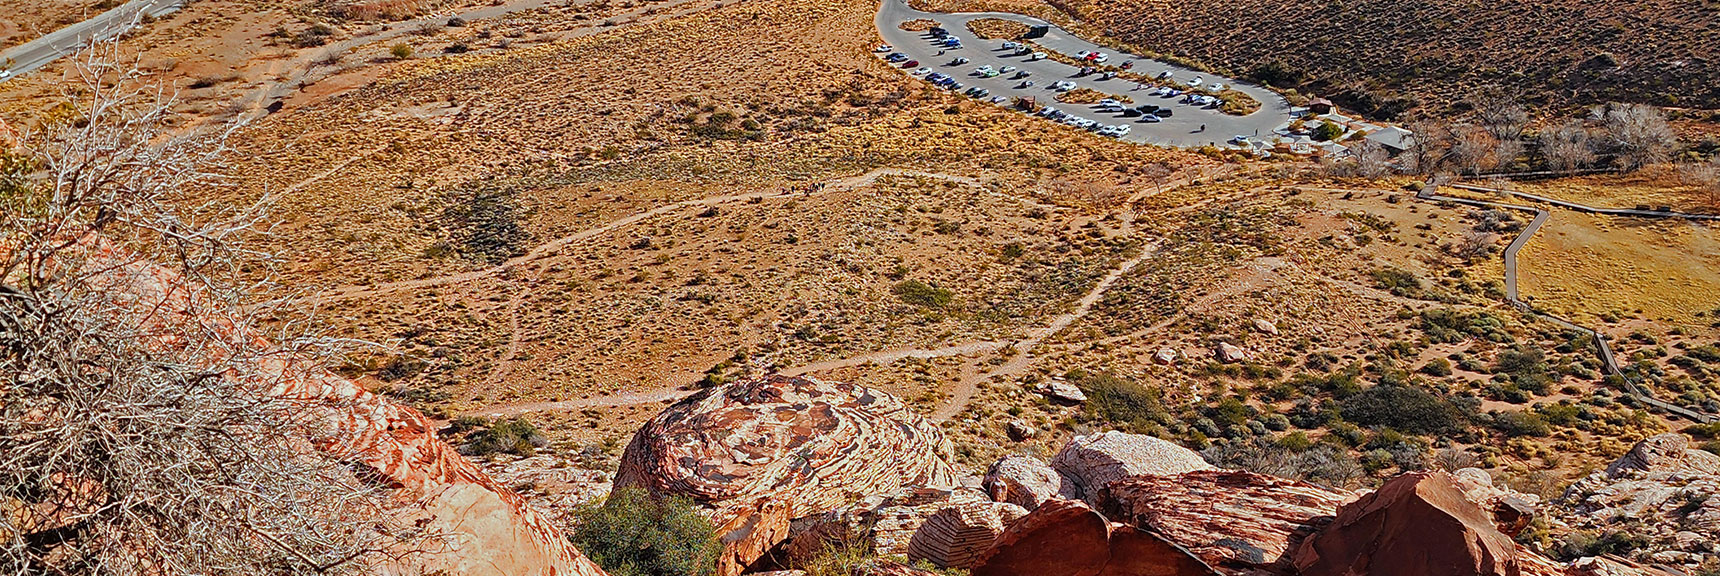 There's a Great Network of Trails in the Calico Basin | Grand Staircase | Calico Basin, Nevada